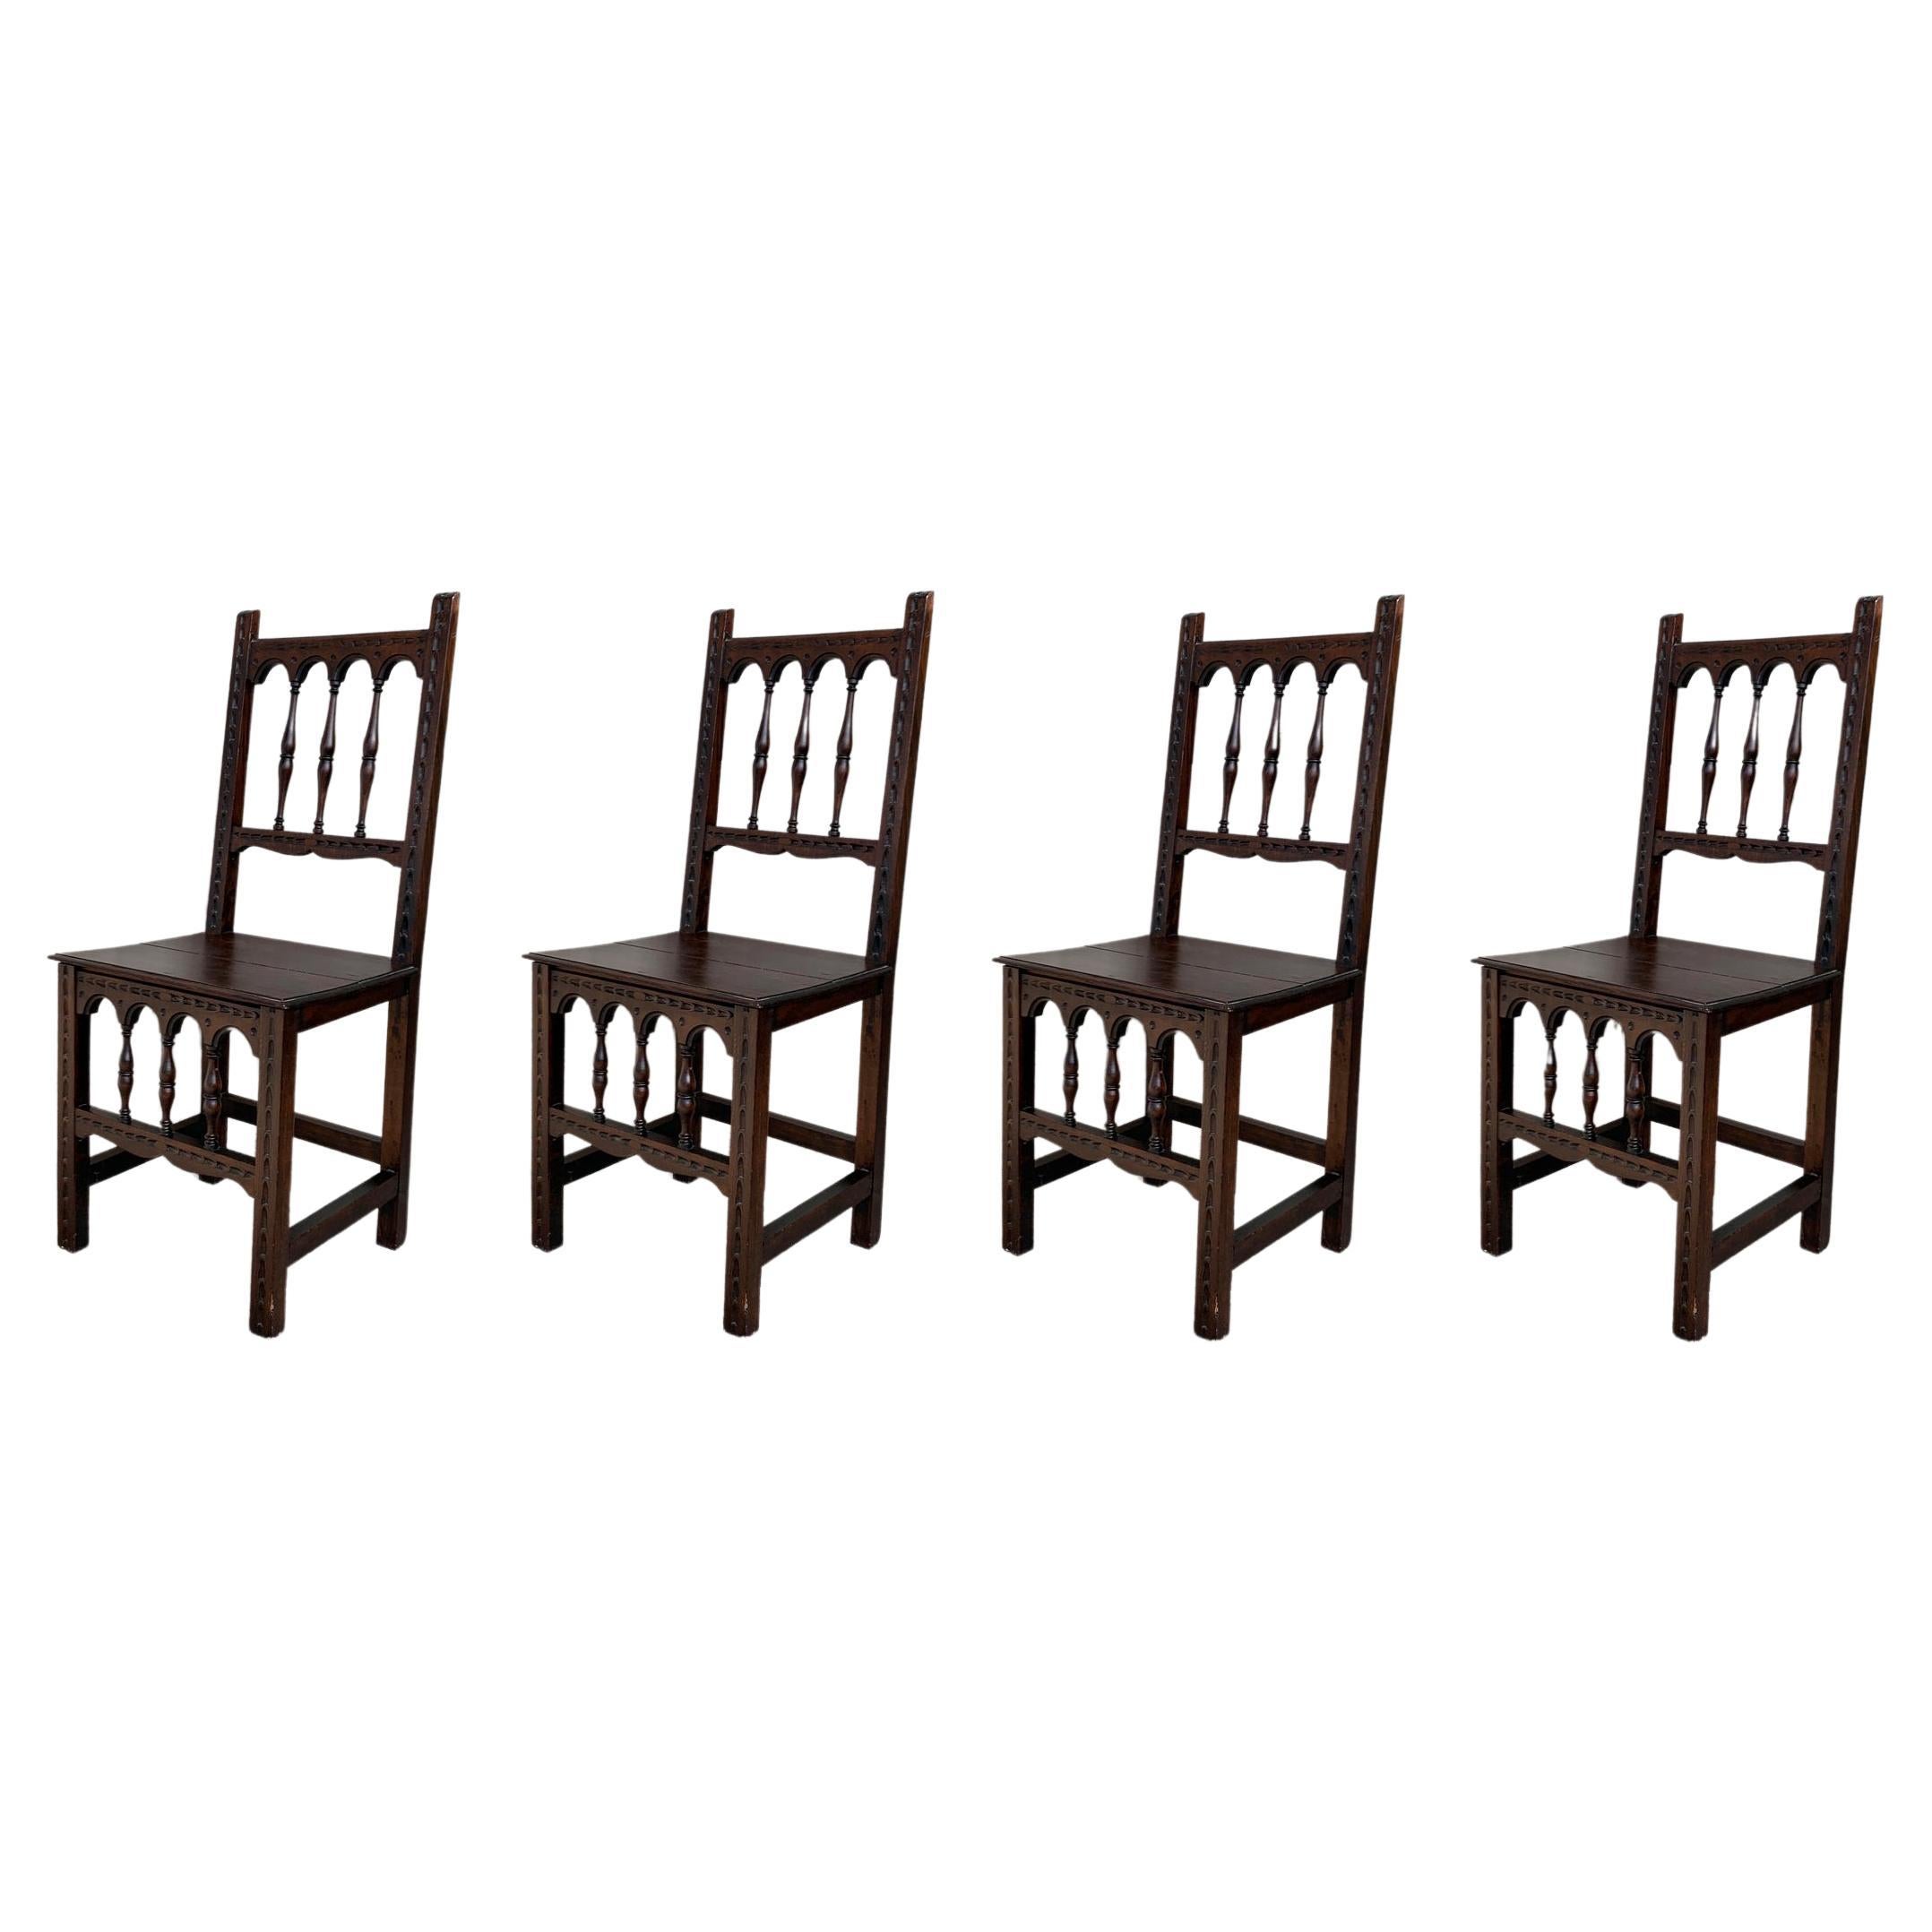 Early 20th Set of Four Spanish Carved Chairs with Wood Seat